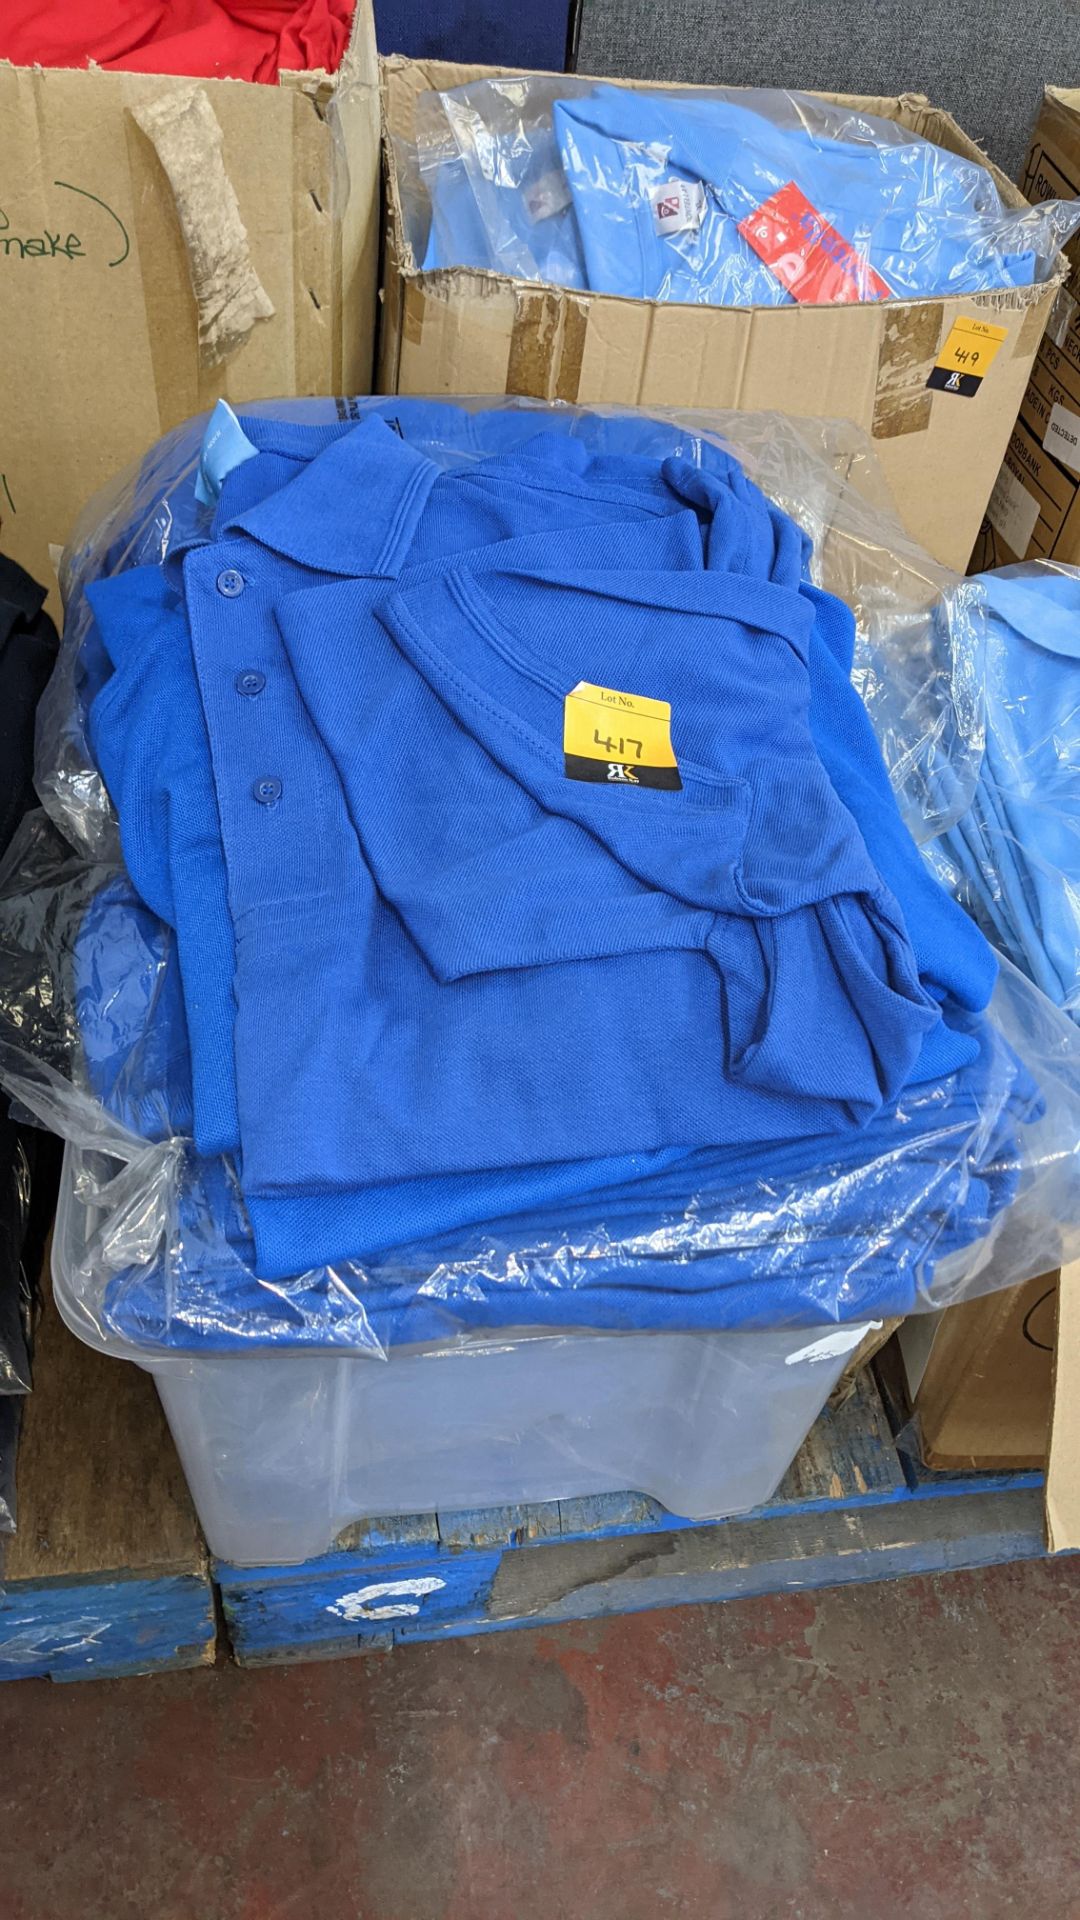 Approx 75 off assorted shades of blue polo shirts